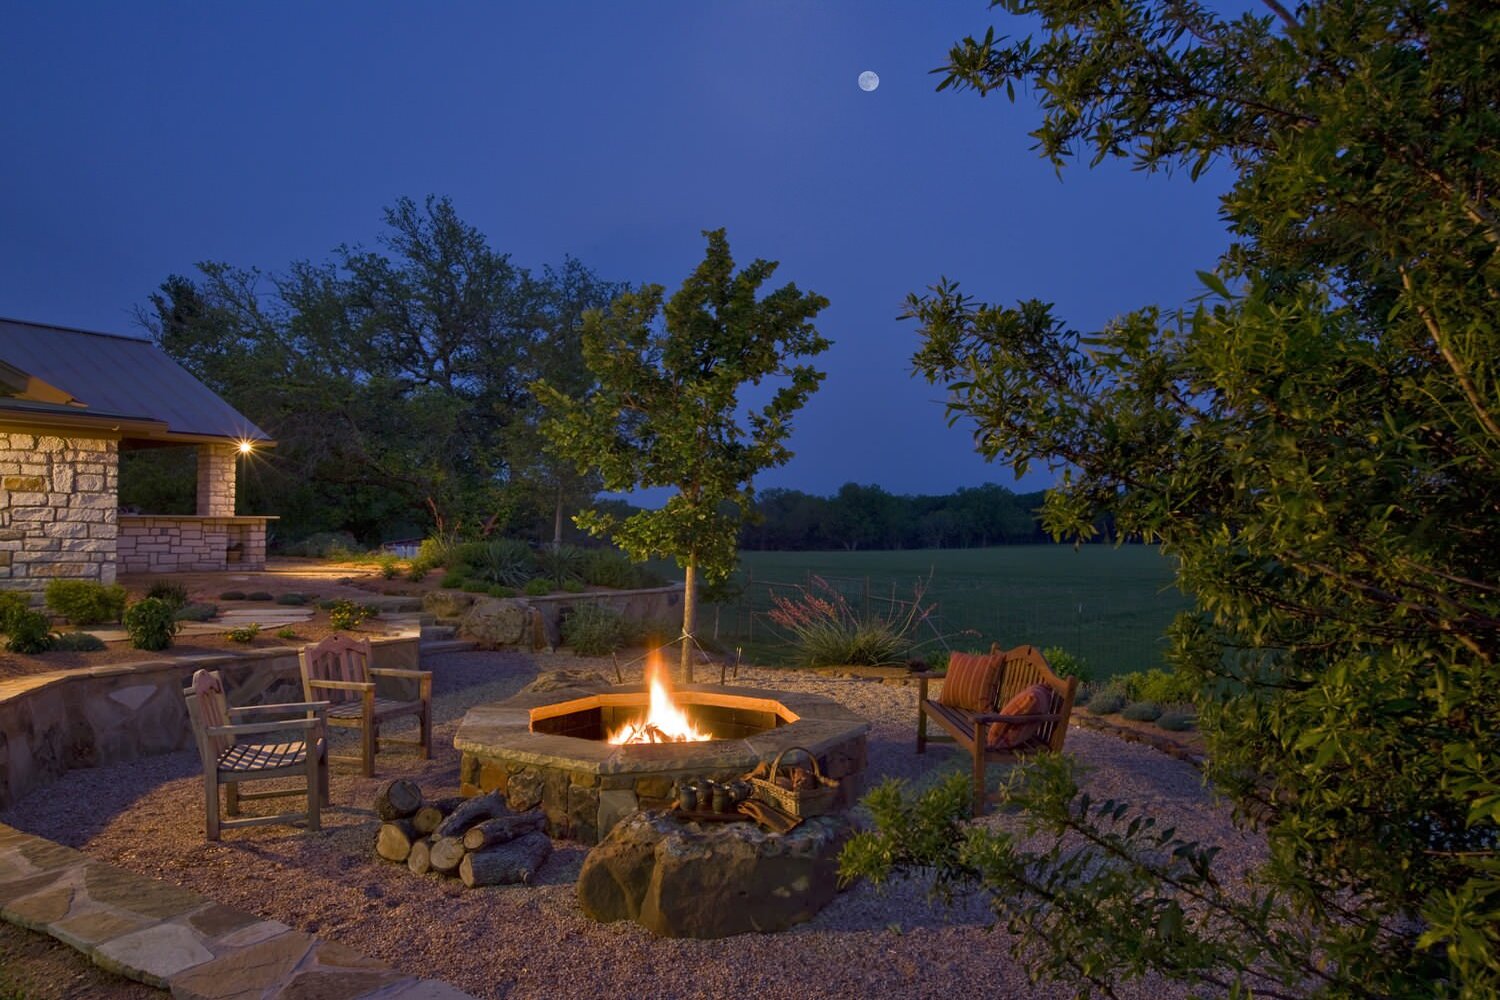 15 Firepit Ideas For The Ultimate Backyard Hangout Space